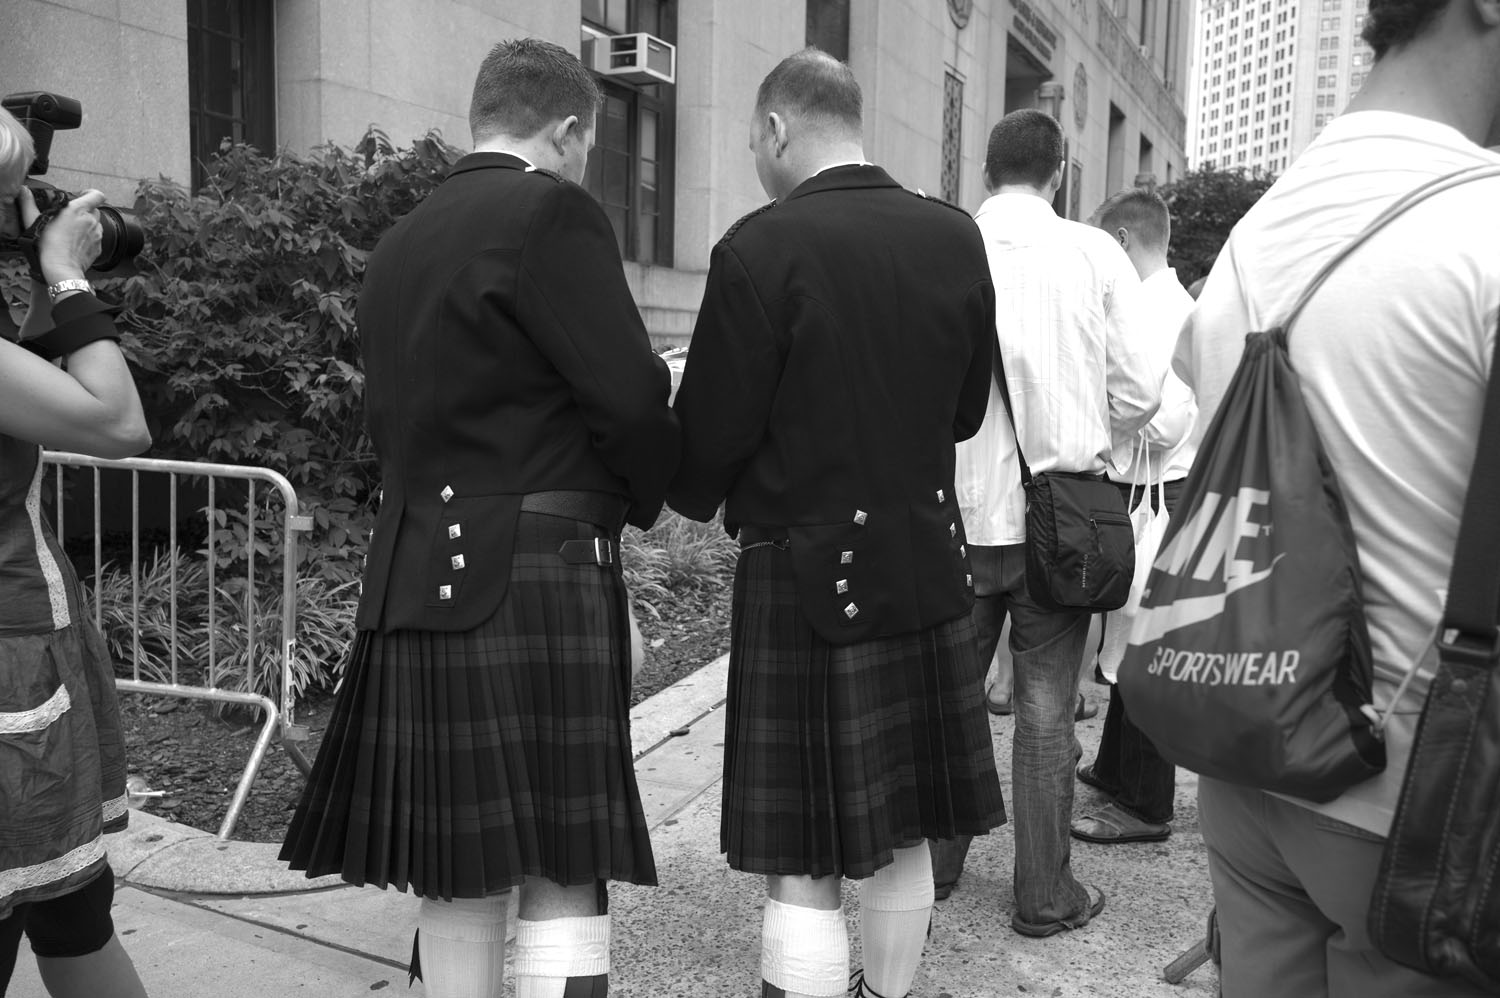 Attire varied widely among those waiting in line outside the Manhattan Clerk's Office.